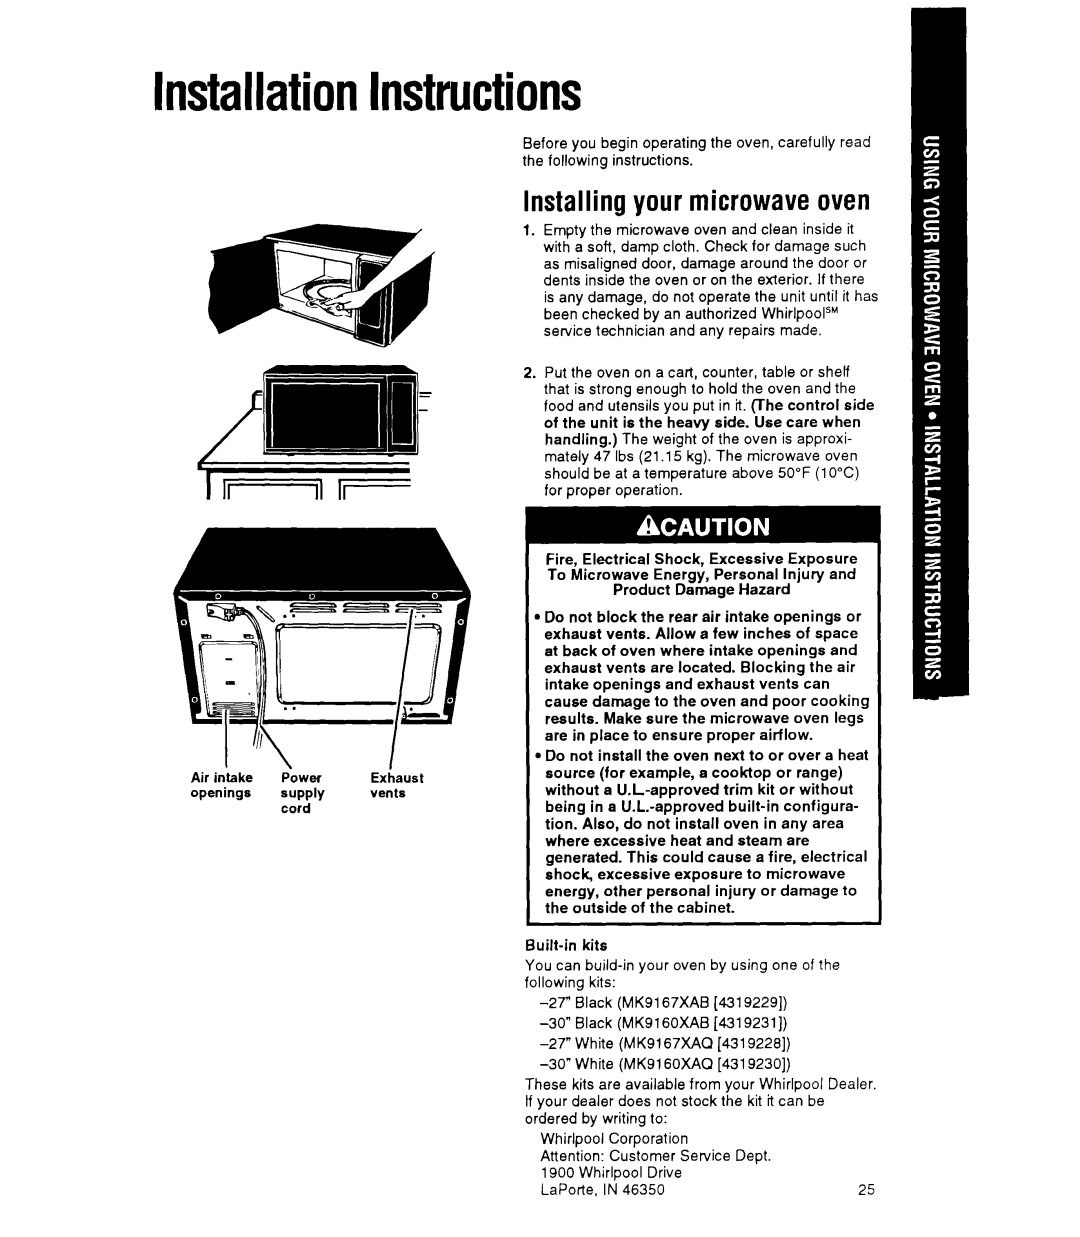 Whirlpool MT9160XY manual InstallationInstructions, Installing your microwave oven 